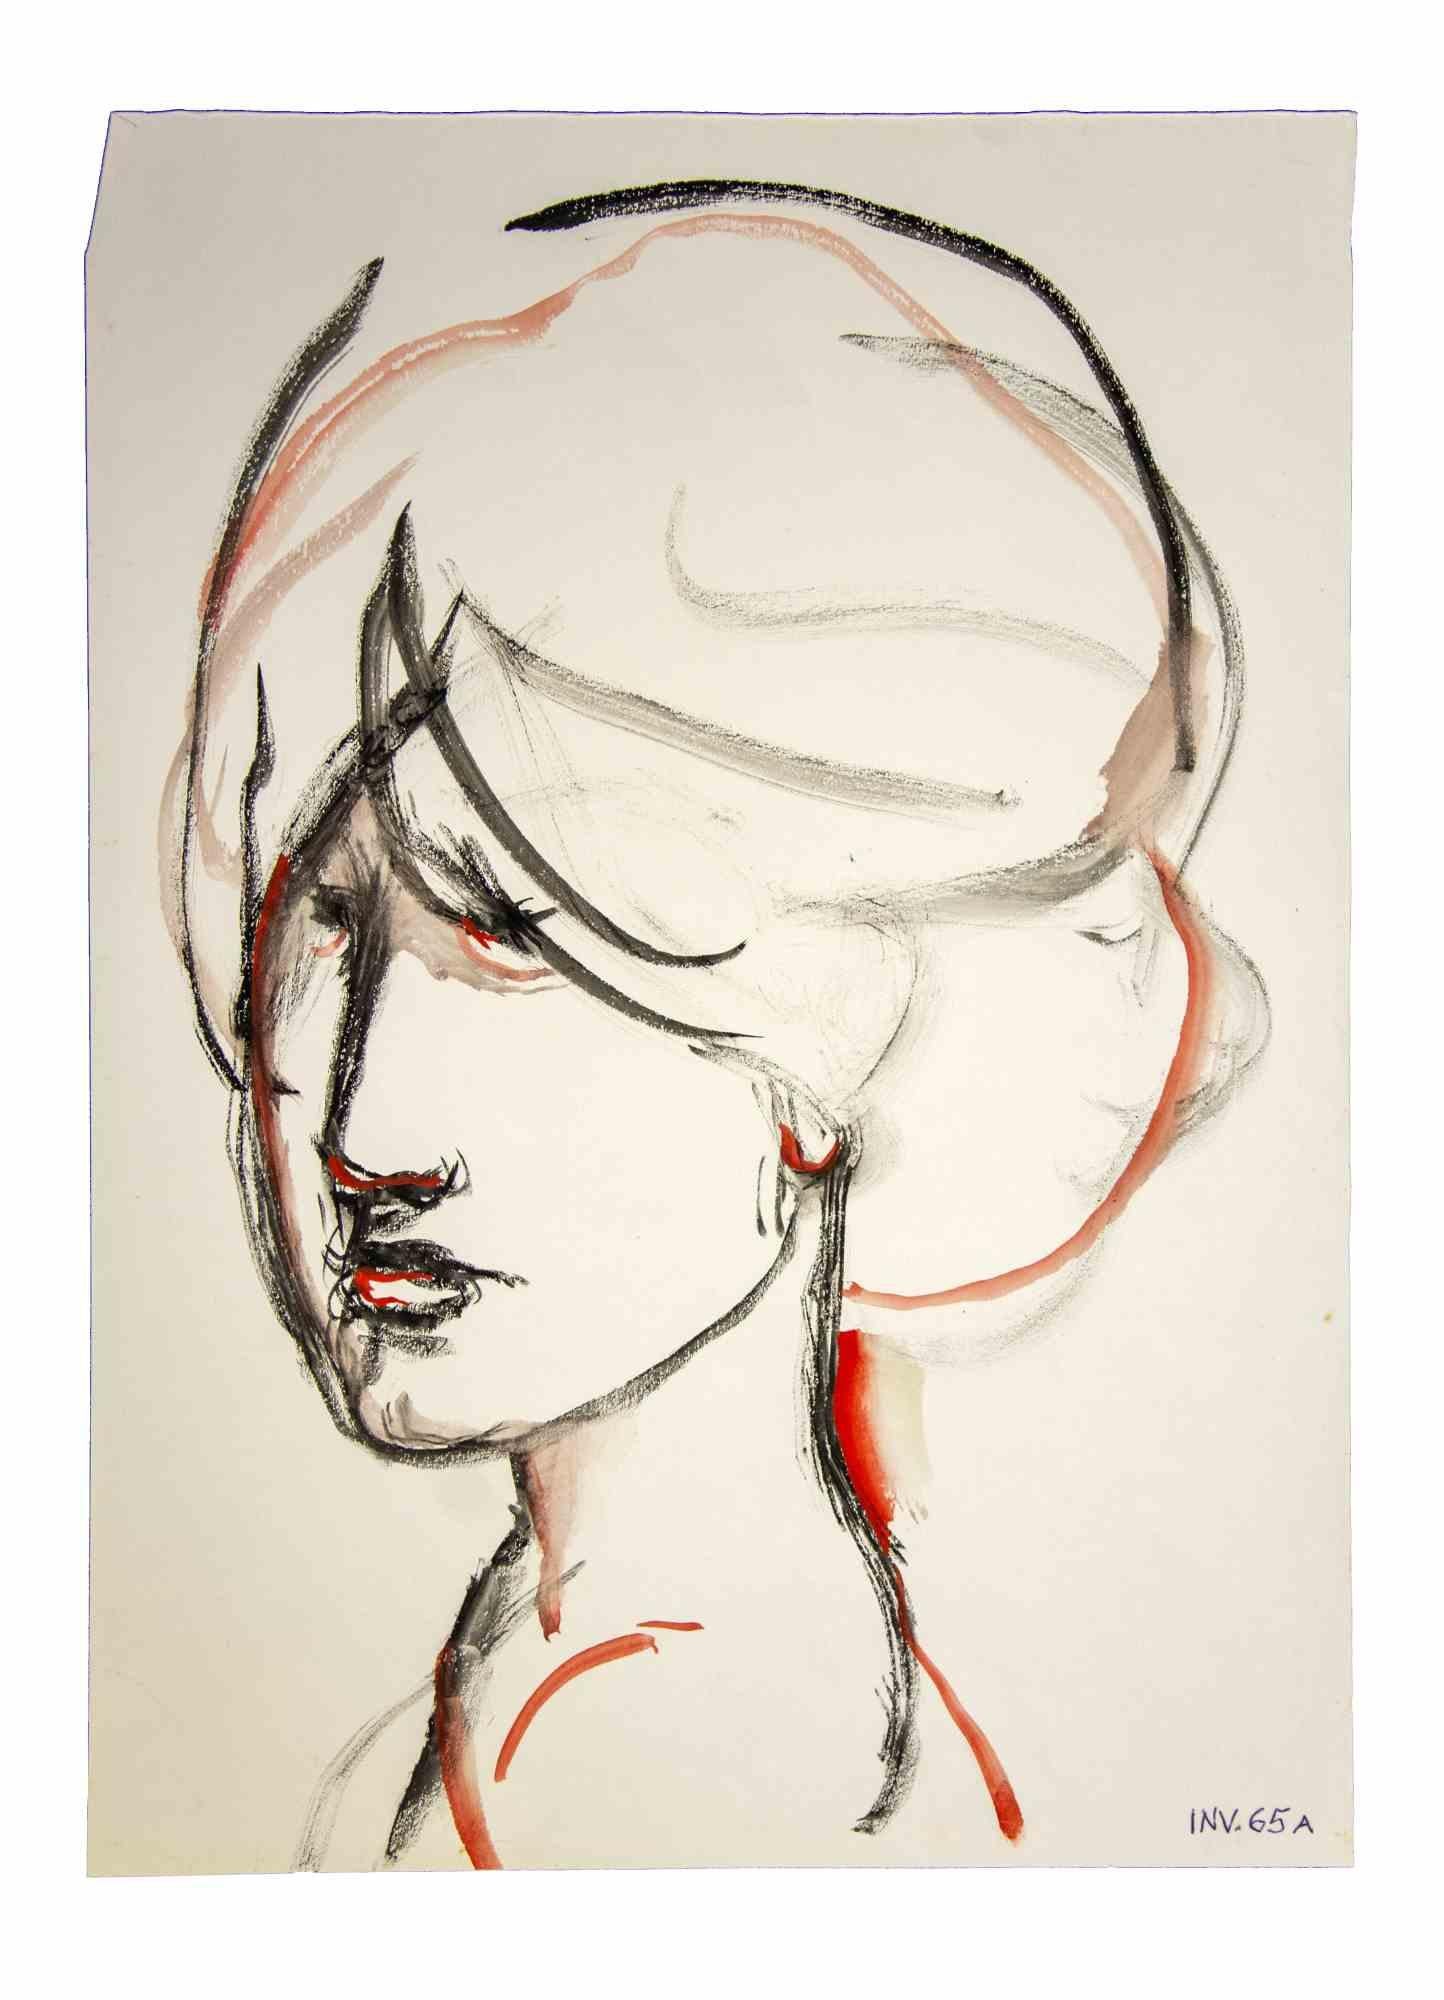 Portrait is an original artwork realized in the 1970s by the Italian Contemporary artist  Leo Guida  (1992 - 2017).

Original watercolor on paper.

Good conditions, except for folding at the top left.

The artwork represents a portrait of a woman